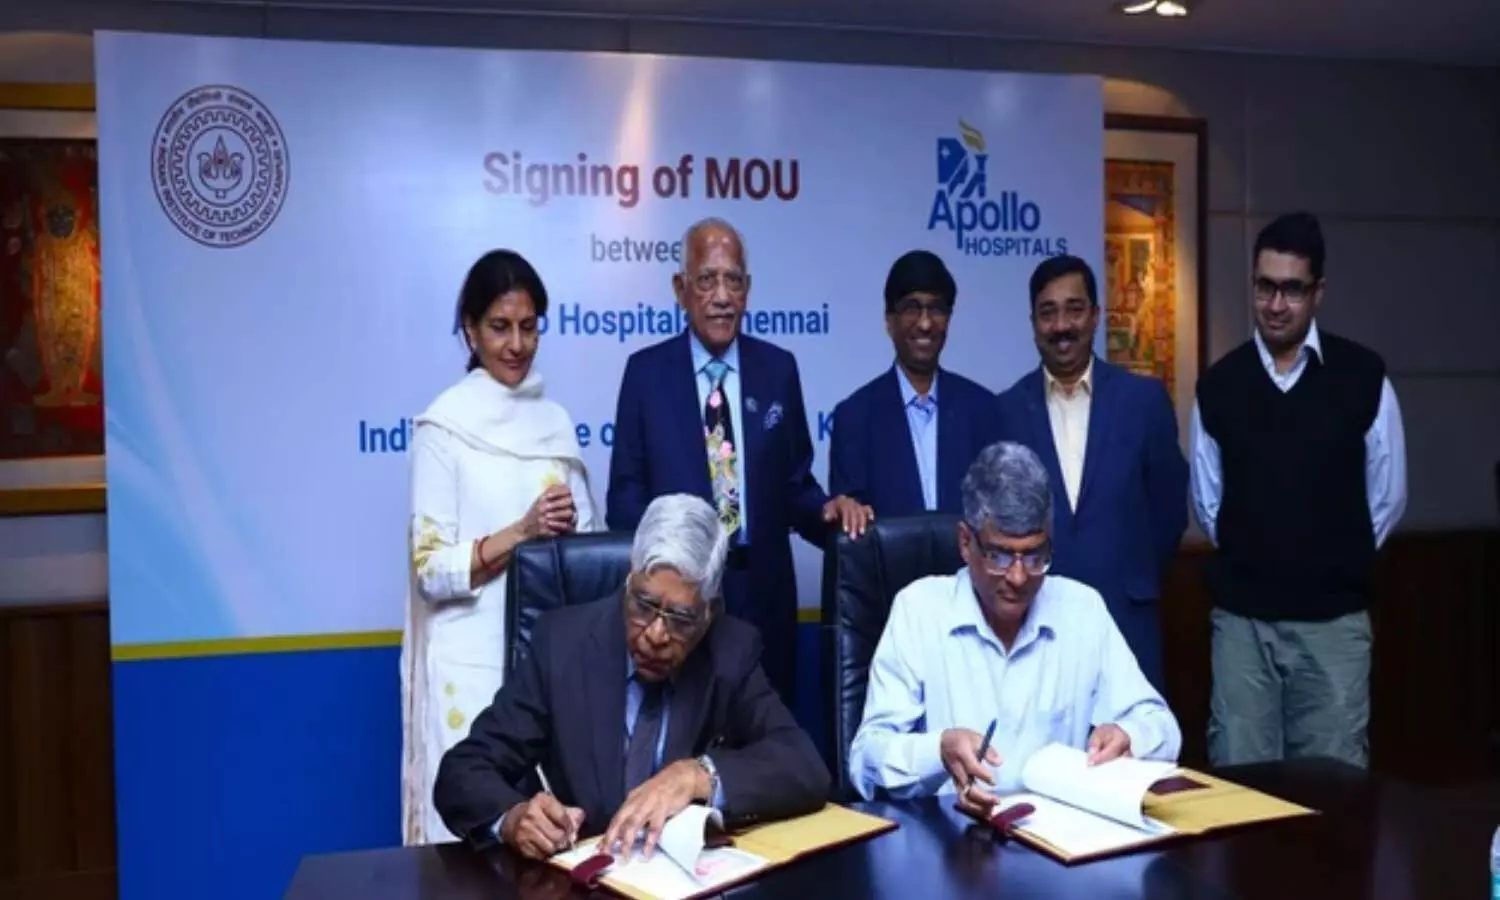 IIT Kanpur, Apollo Hospitals signs MoU for research collaboration in MedTech